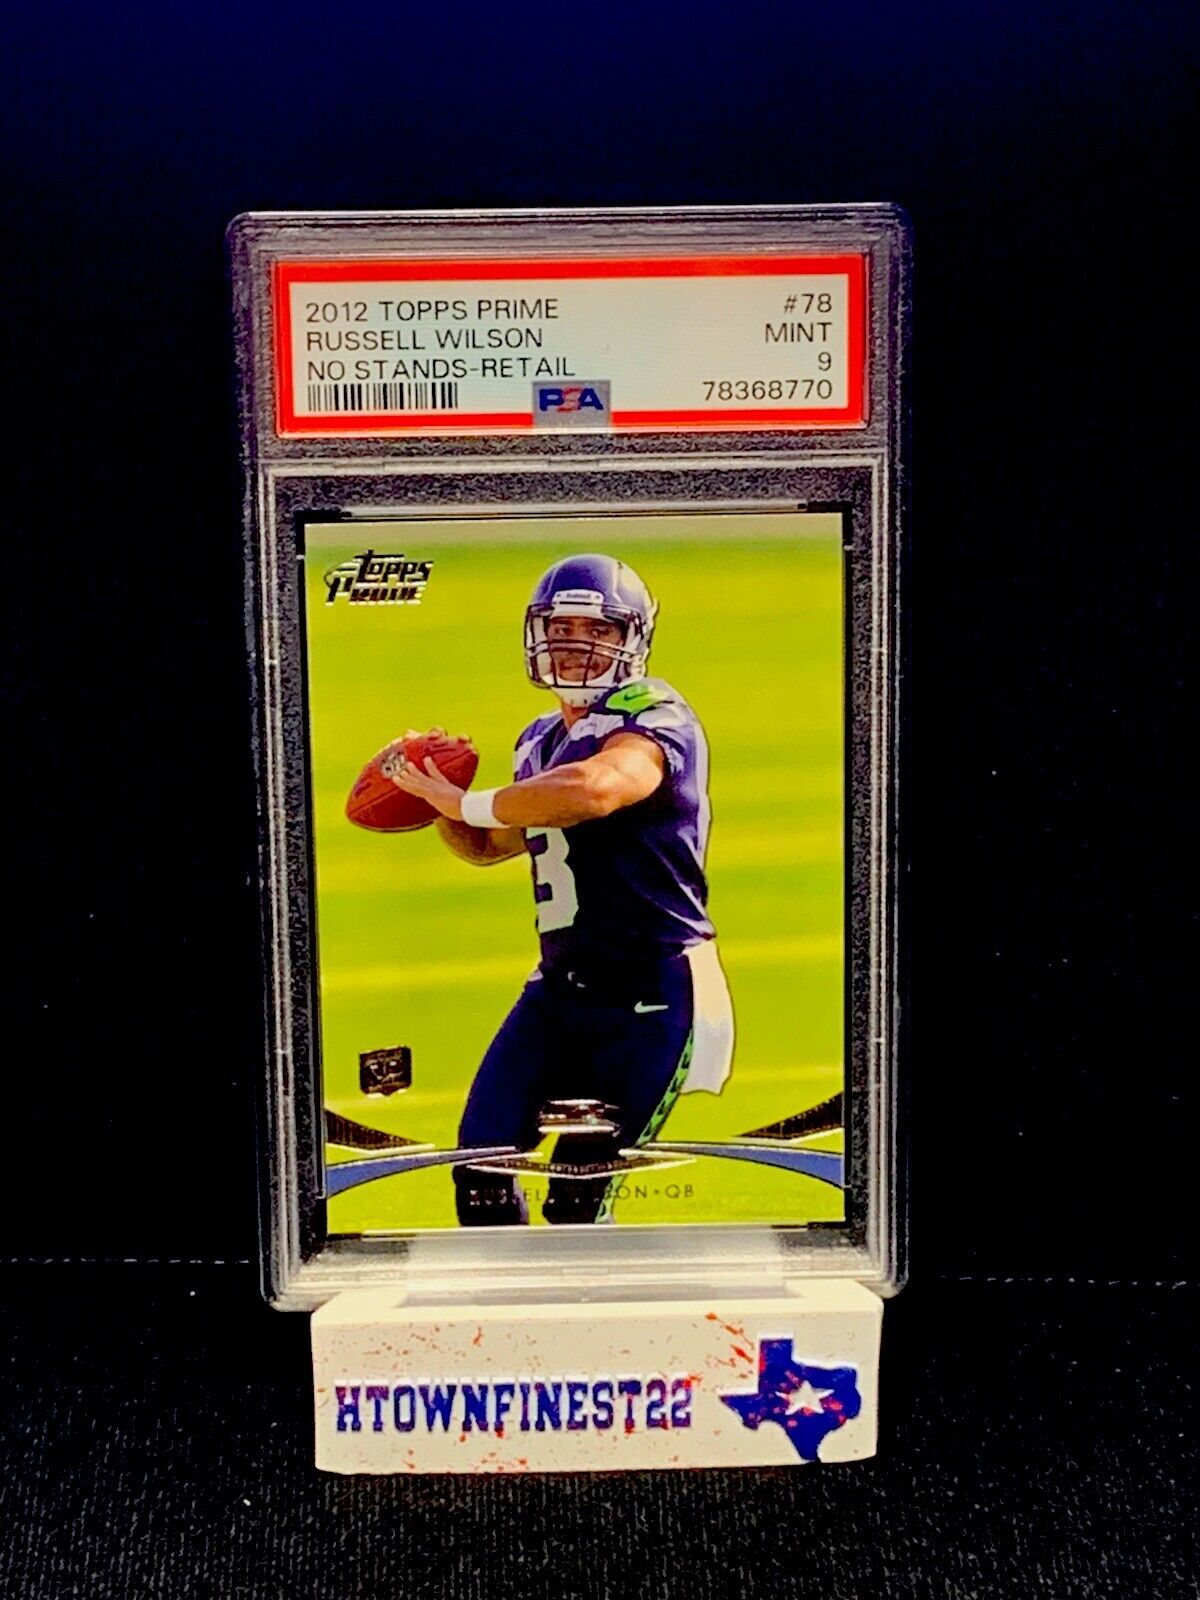 2012 Topps Prime Retail Russell Wilson #78 PSA 9 MINT Rookie RC